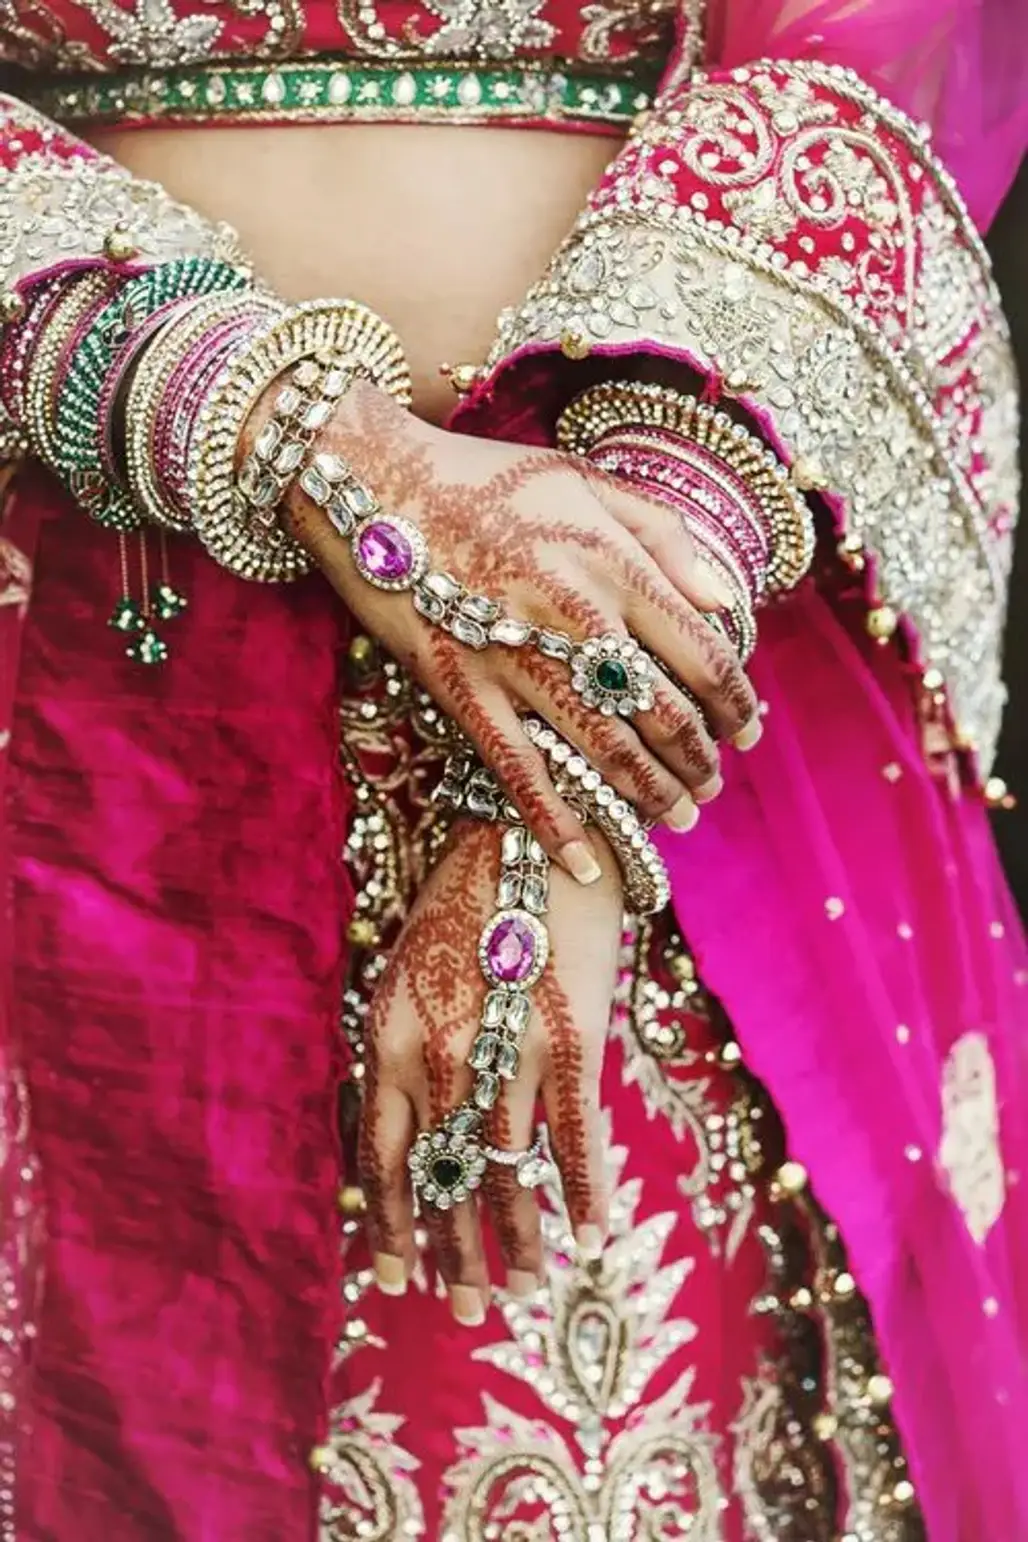 This Traditional Bridal Look Complete with Jewelry